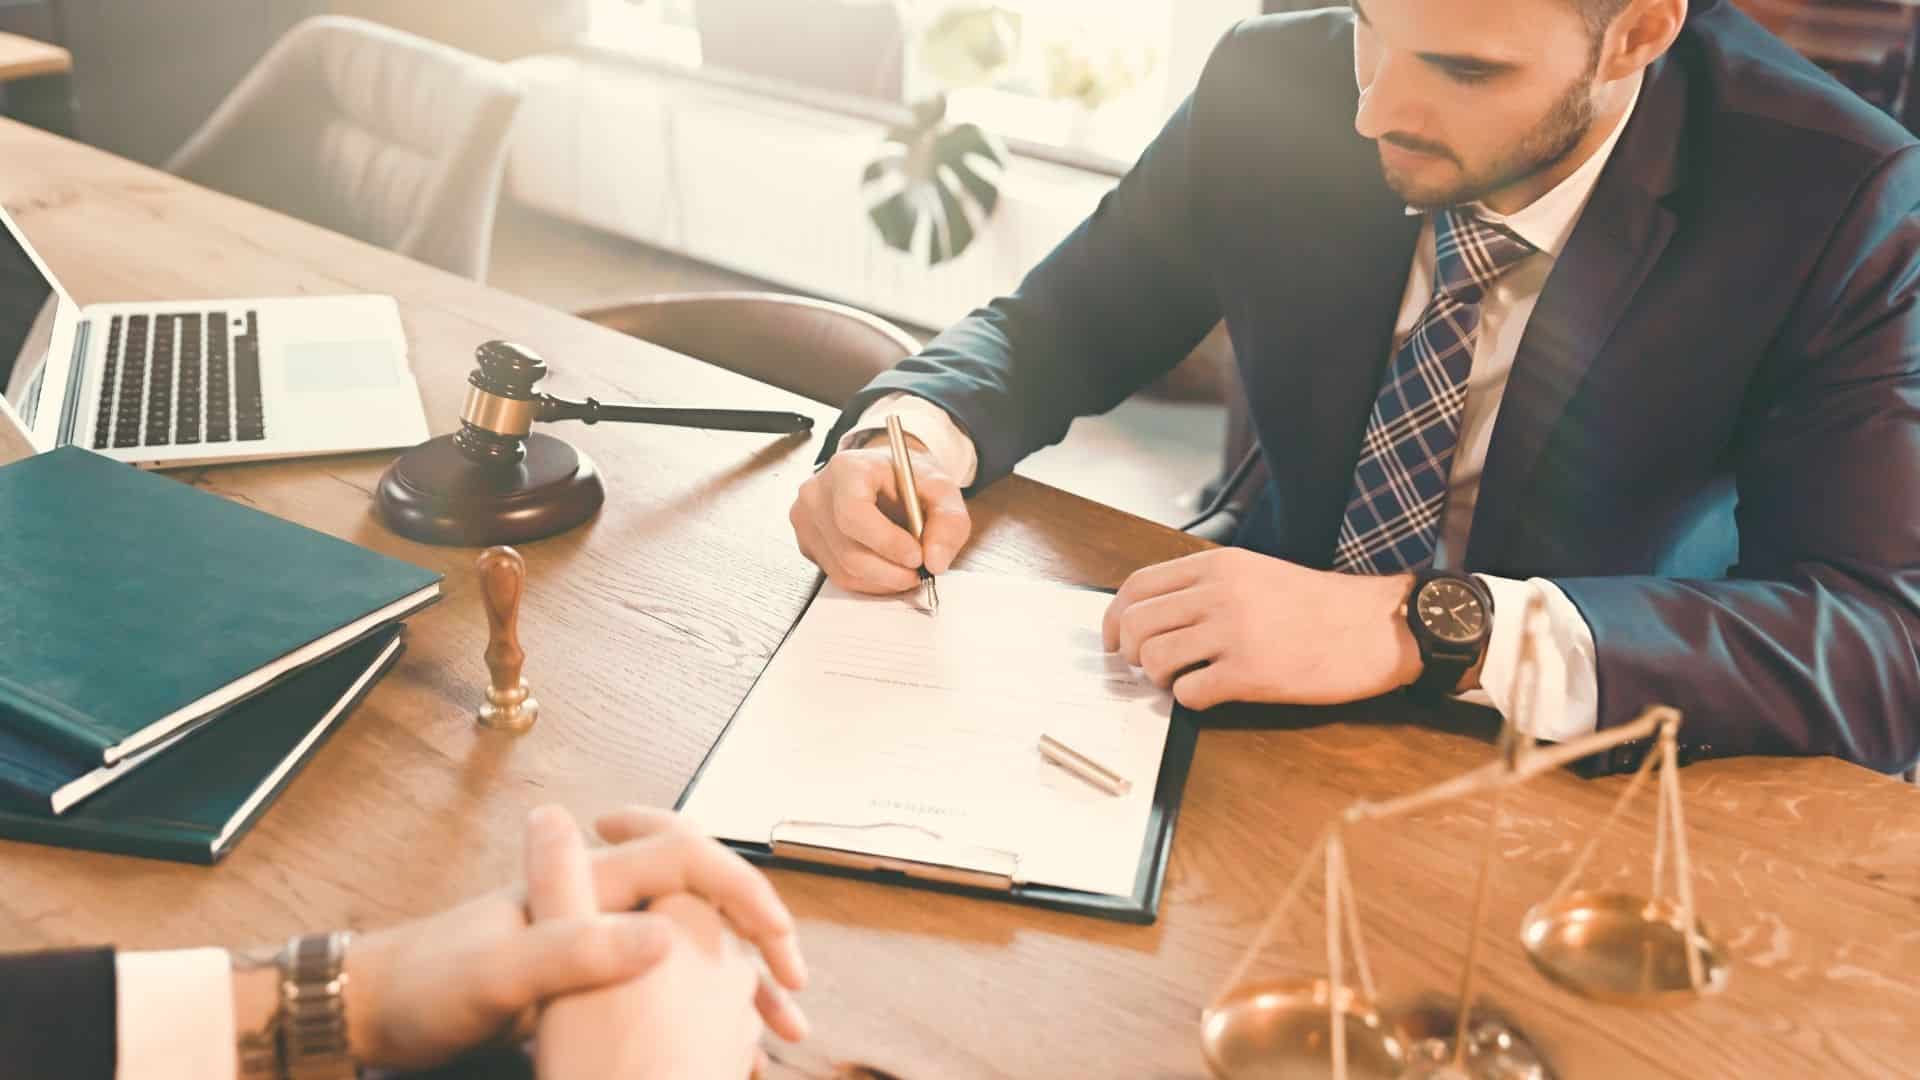 Becoming A Tax Attorney In 2022 [Detailed Guide]